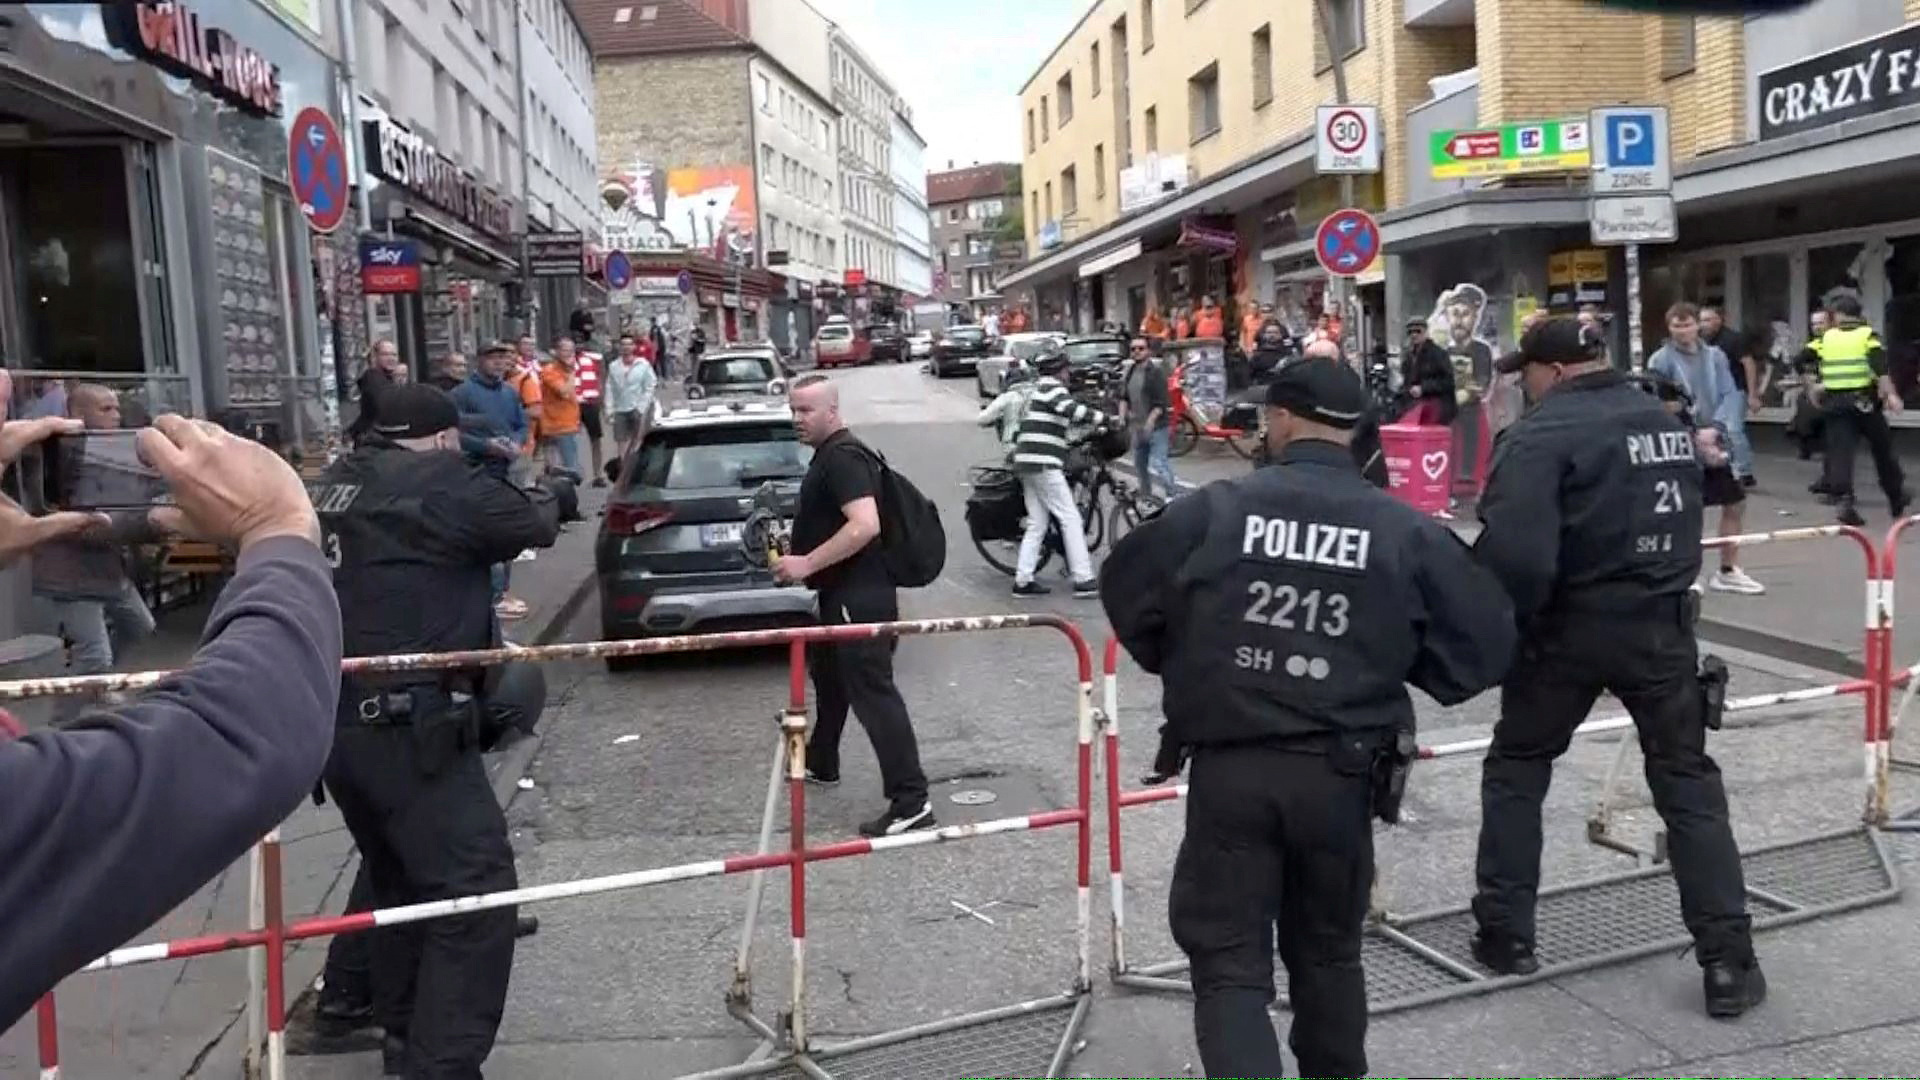 Man carrying an axe was shot down by police officers in the St. Pauli district of Hamburg,